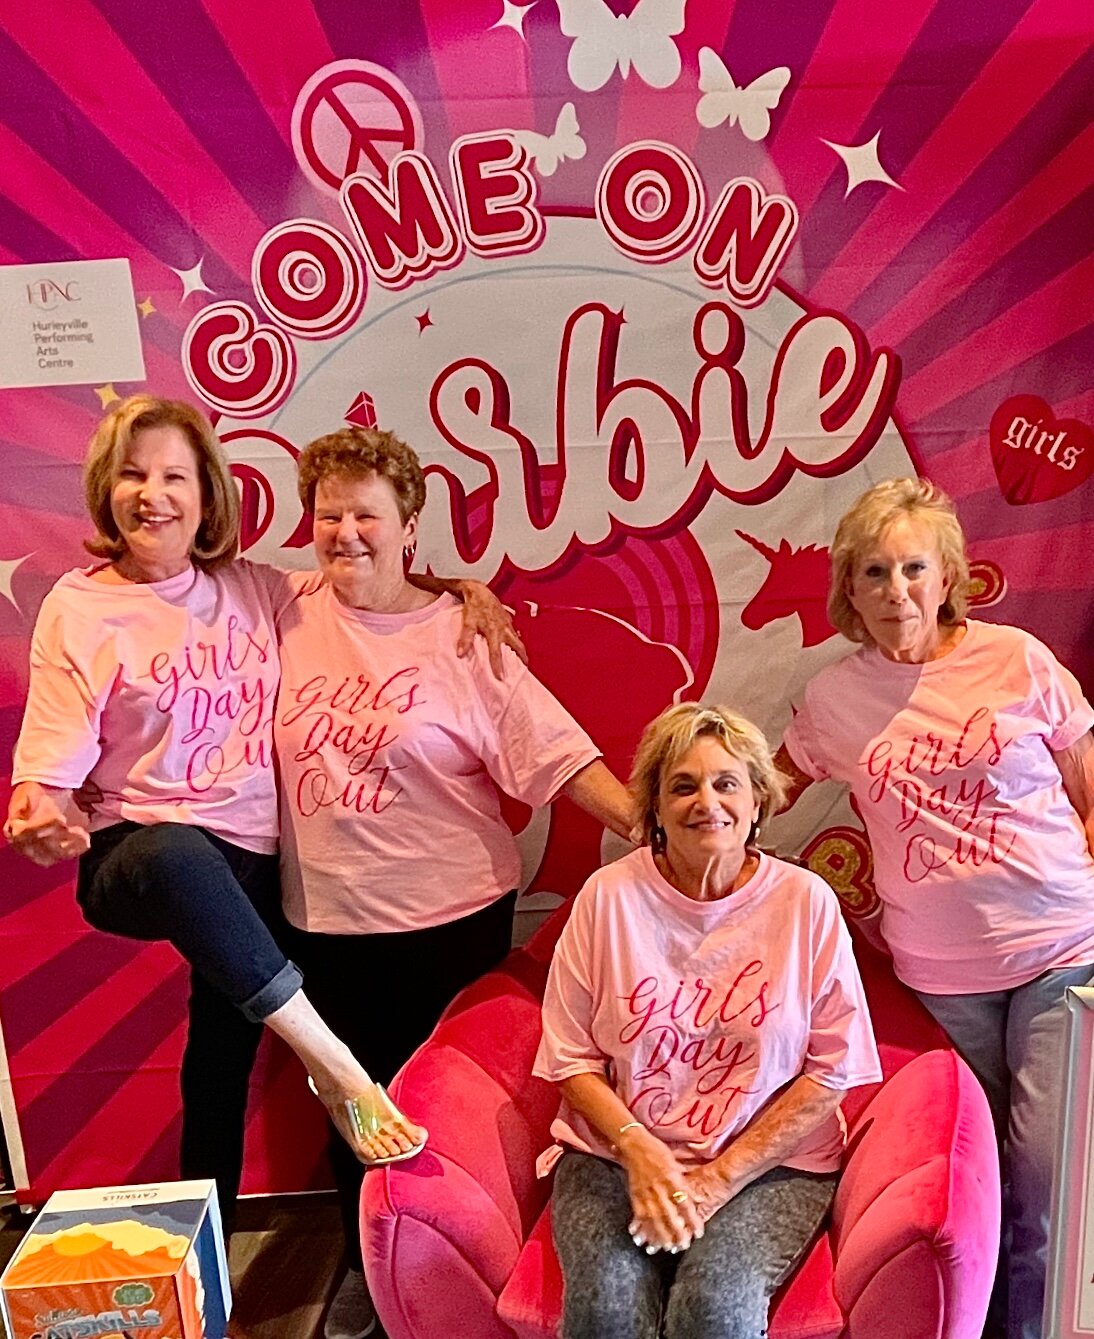 Patrice Held, left; Nancy Grimes; Nancy Hirsch; and Alicia Schwartz set the gold standard for "Barbie" fans at the Hurleyville Performing Arts Theatre last weekend. Yes, they loved it.